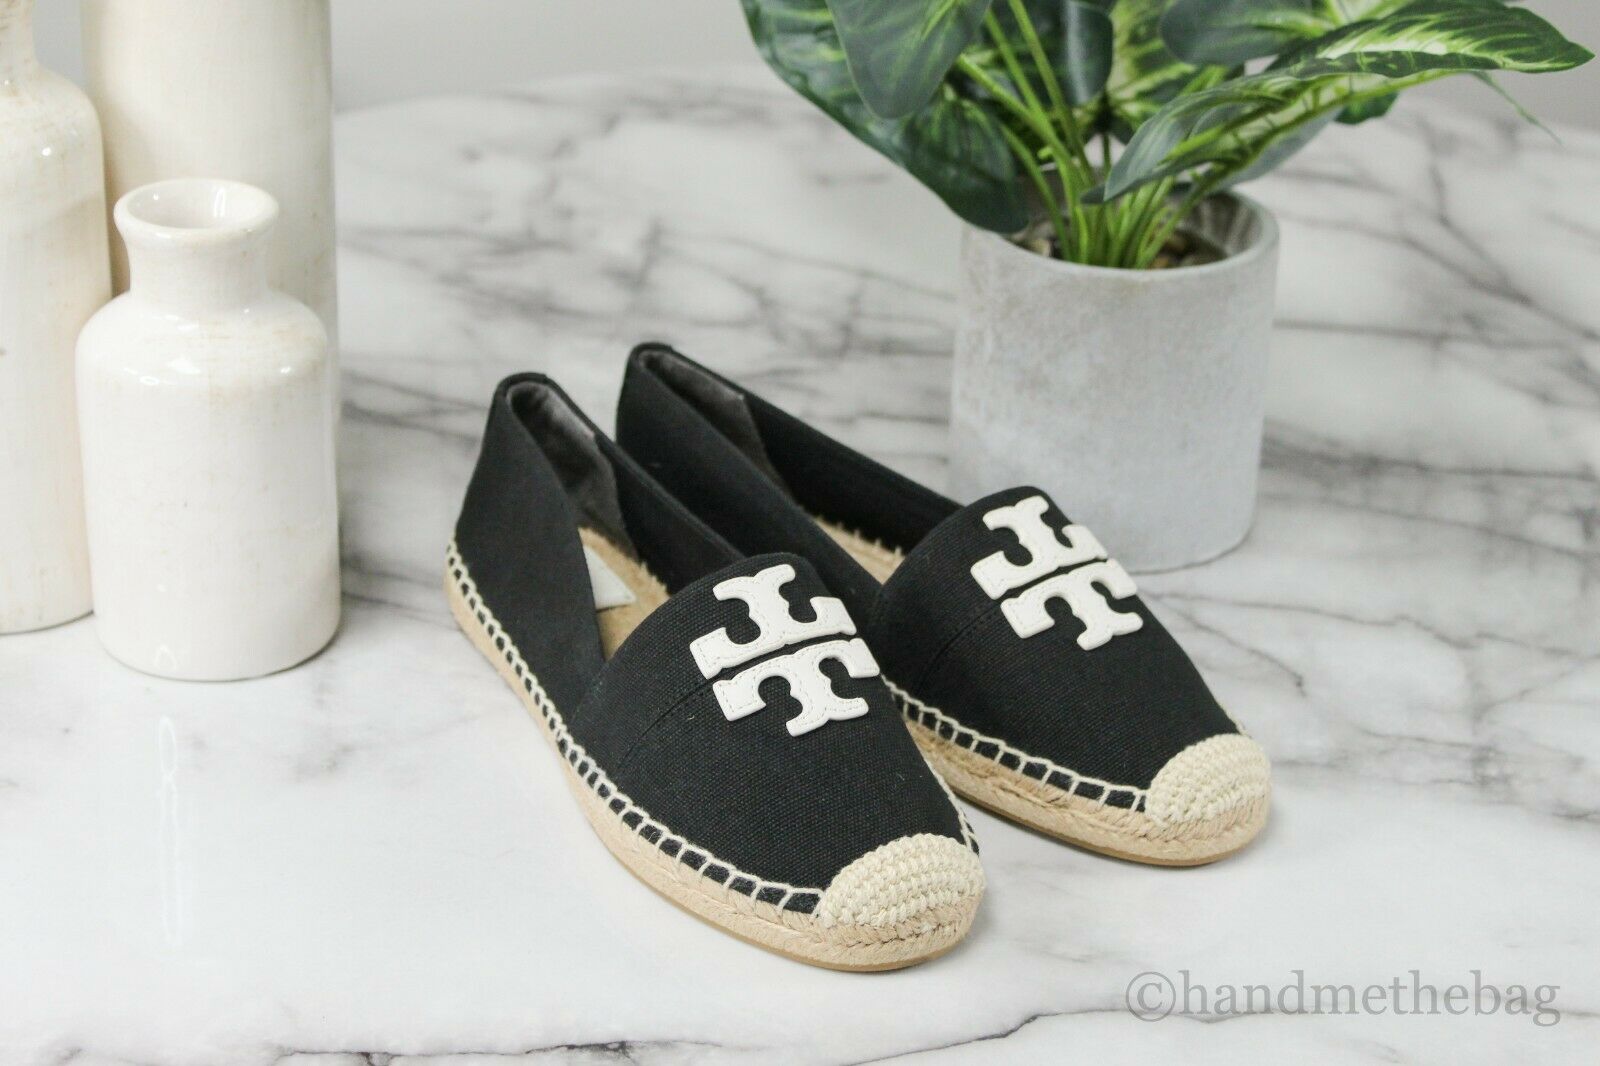 Tory Burch (40034) Weston Perfect Black White Recycled Canvas Leather Flat Espadrille Shoes